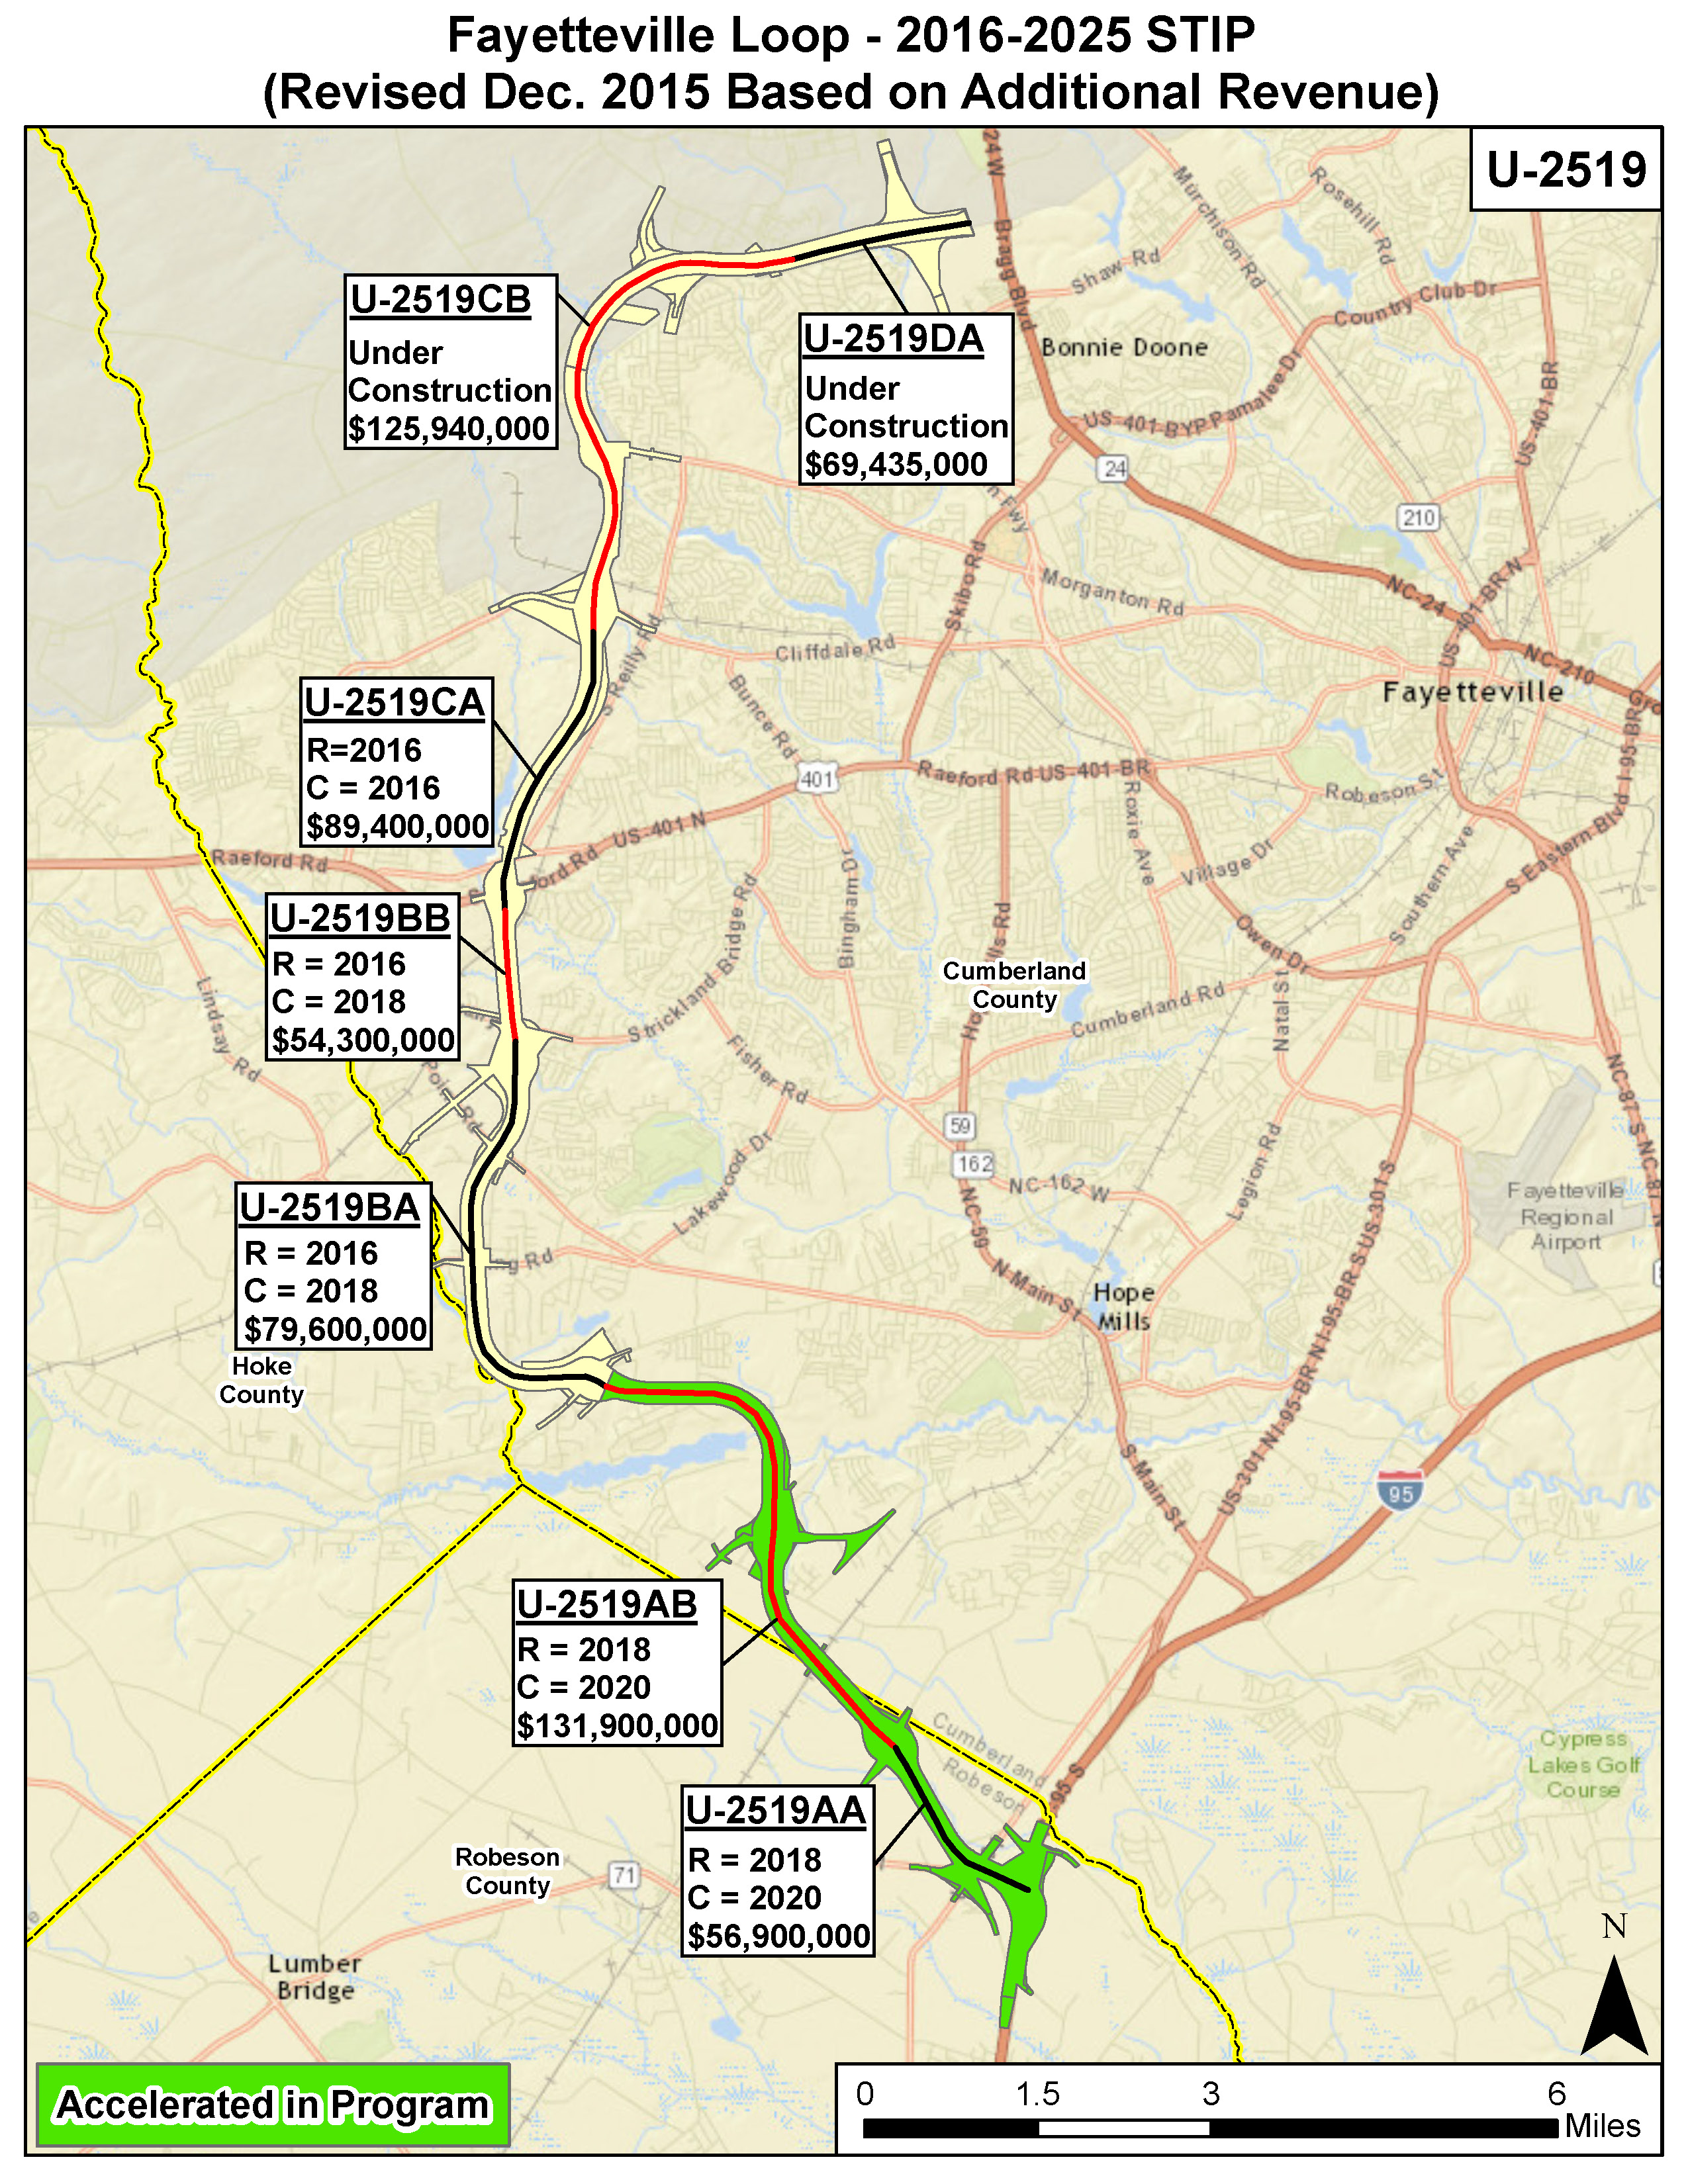 NCDOT construction timetable for the Fayetteville Loop in Dec. 2015